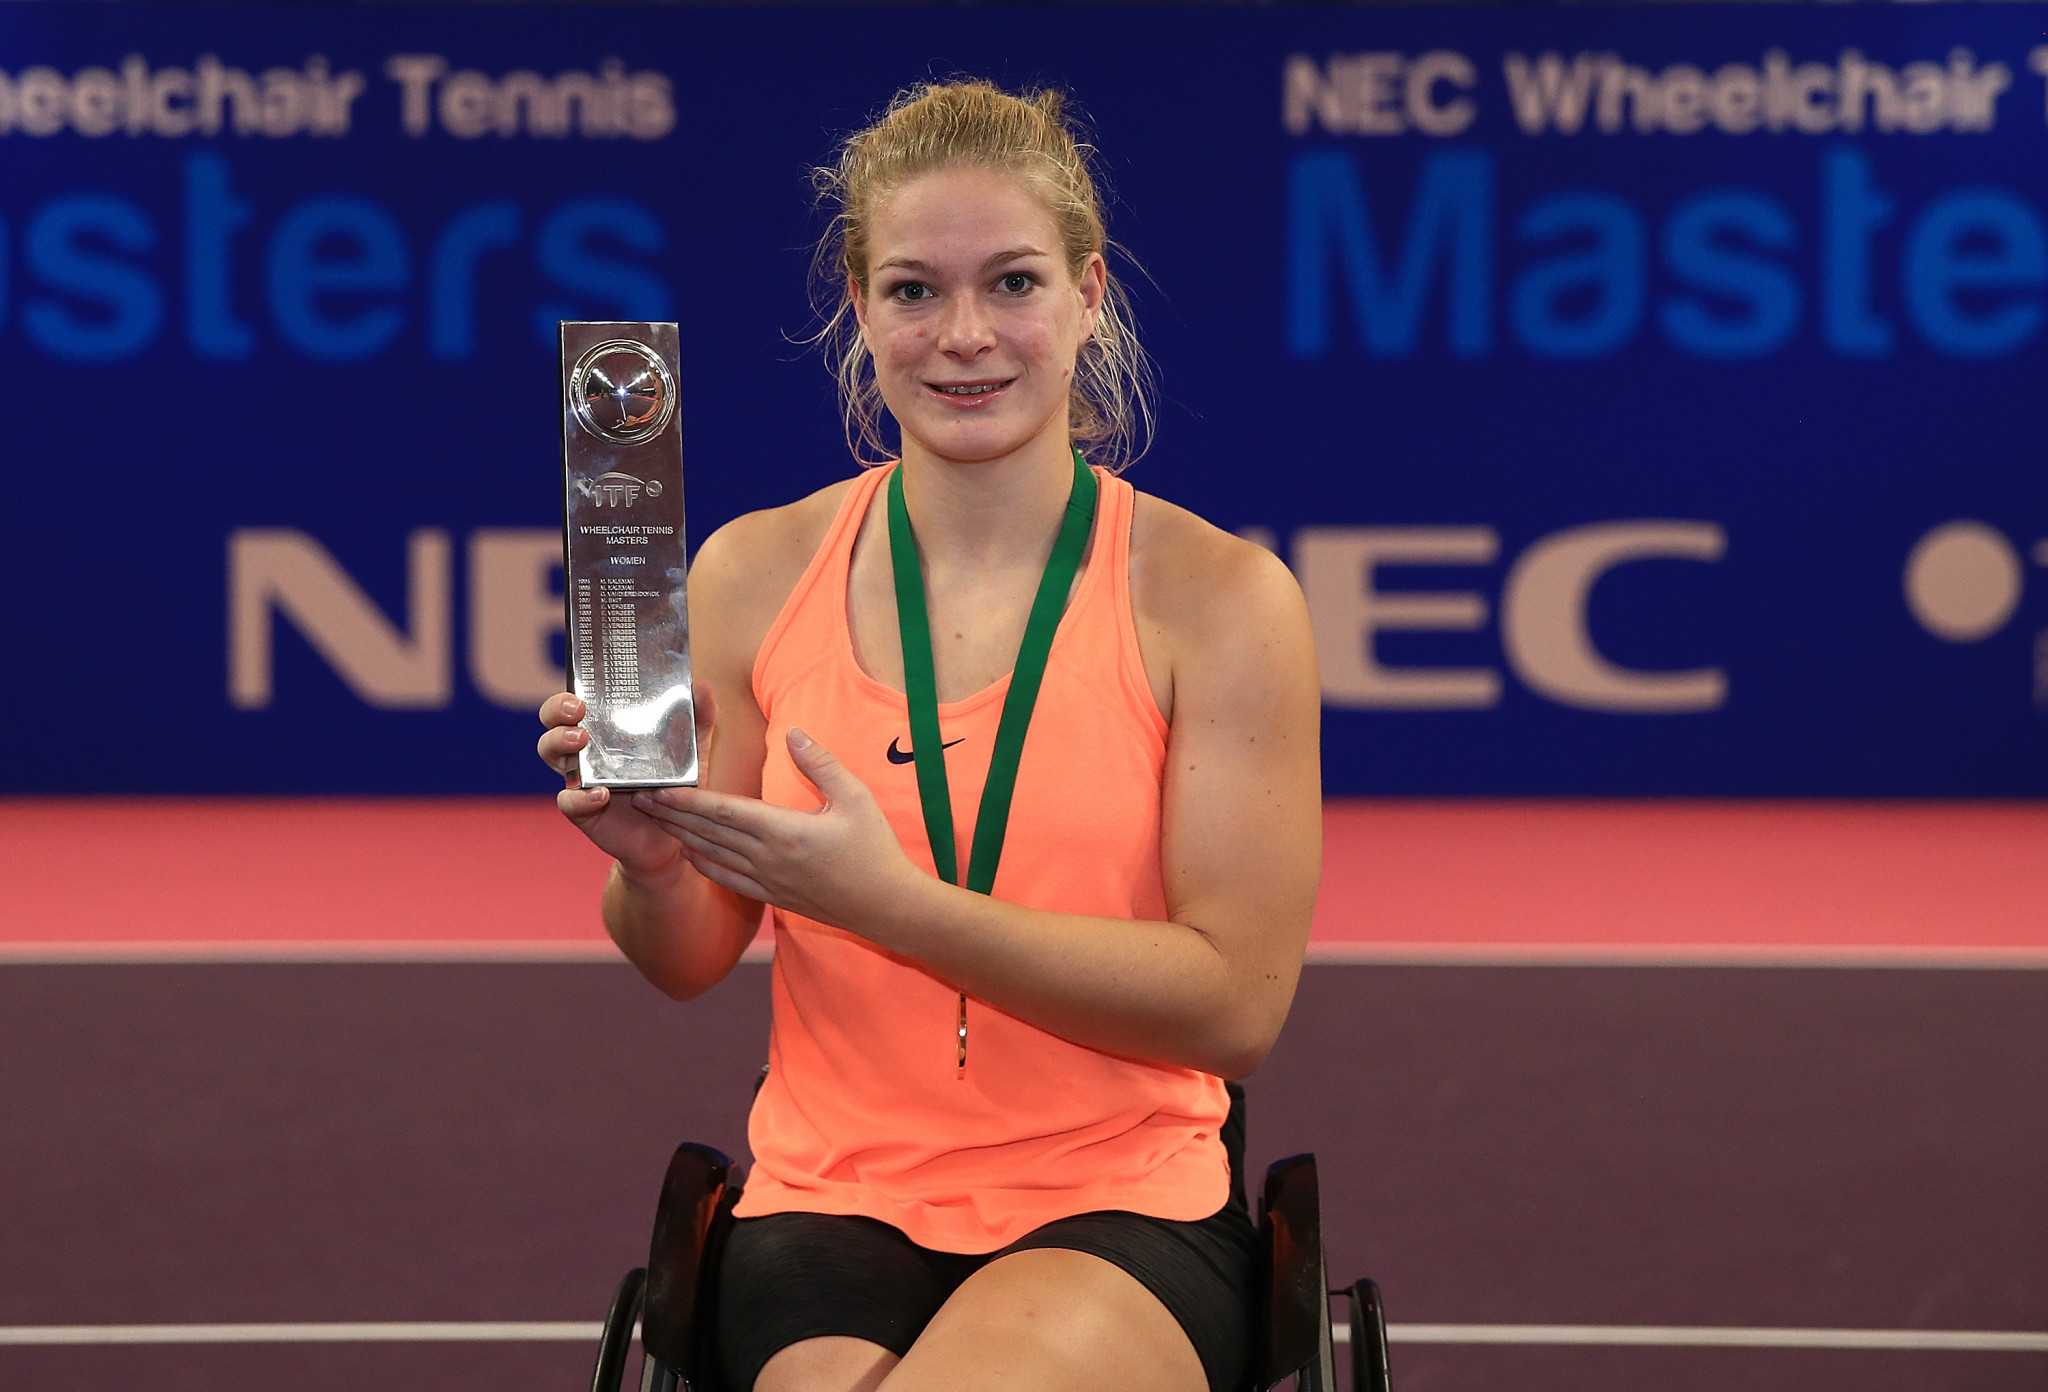 Dutch wheelchair tennis player Diede de Groot has been nominated for the IPC December Allianz Athlete of the Month Award after winning the year-end NEC Masters having also won three Grand Slam singles titles in 2018 ©Getty Images